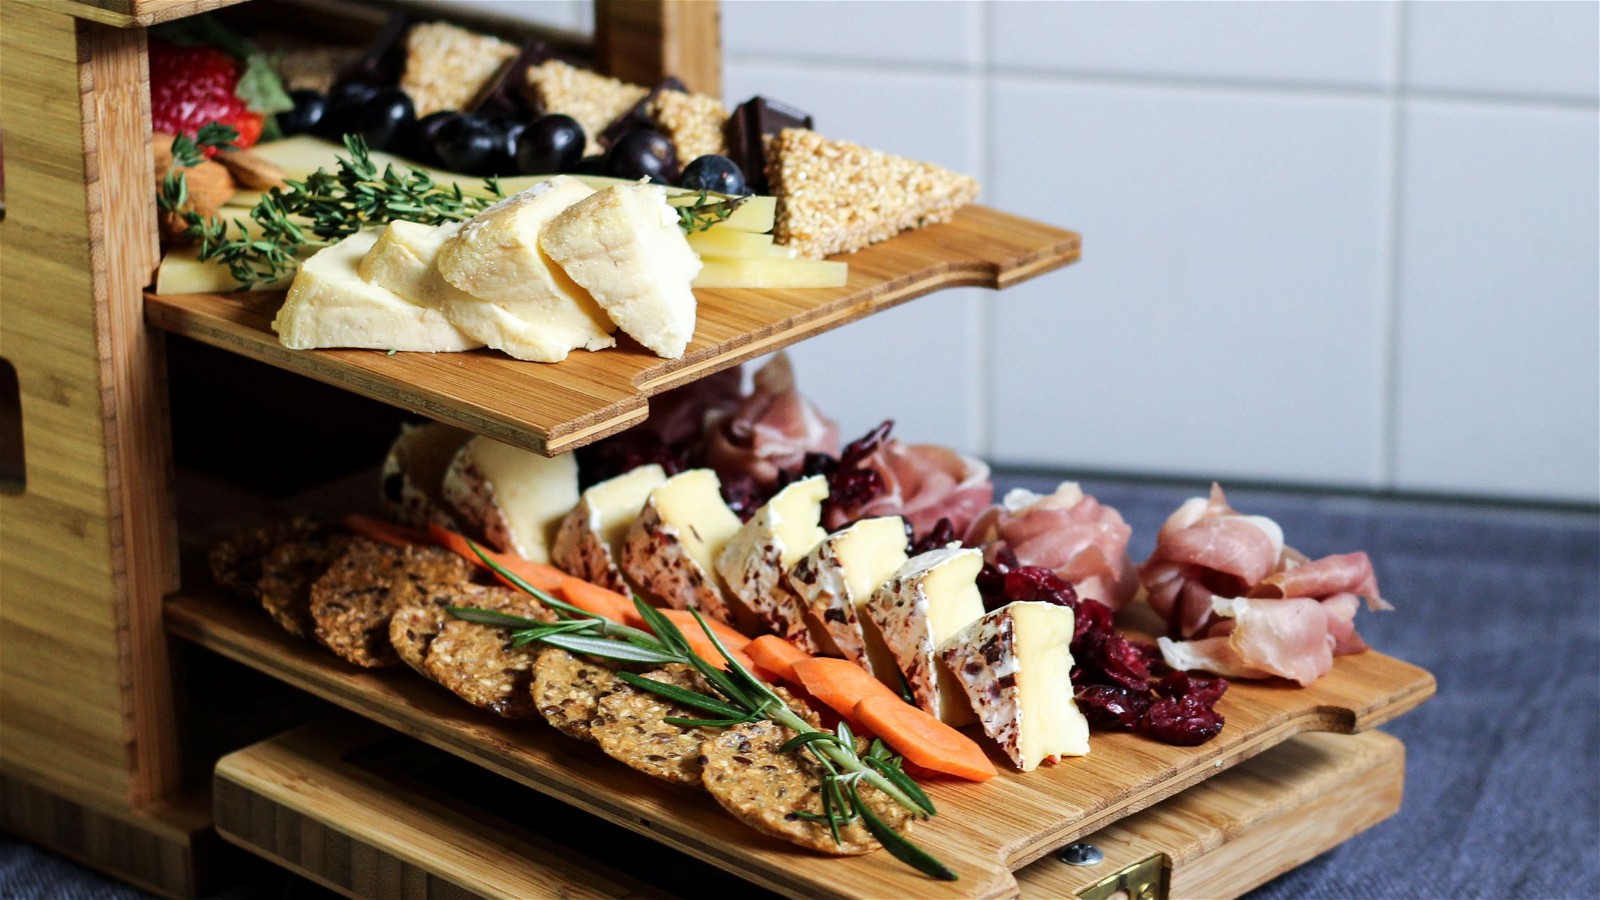 Image of How to Build a Cheese & Charcuterie Board Recipe